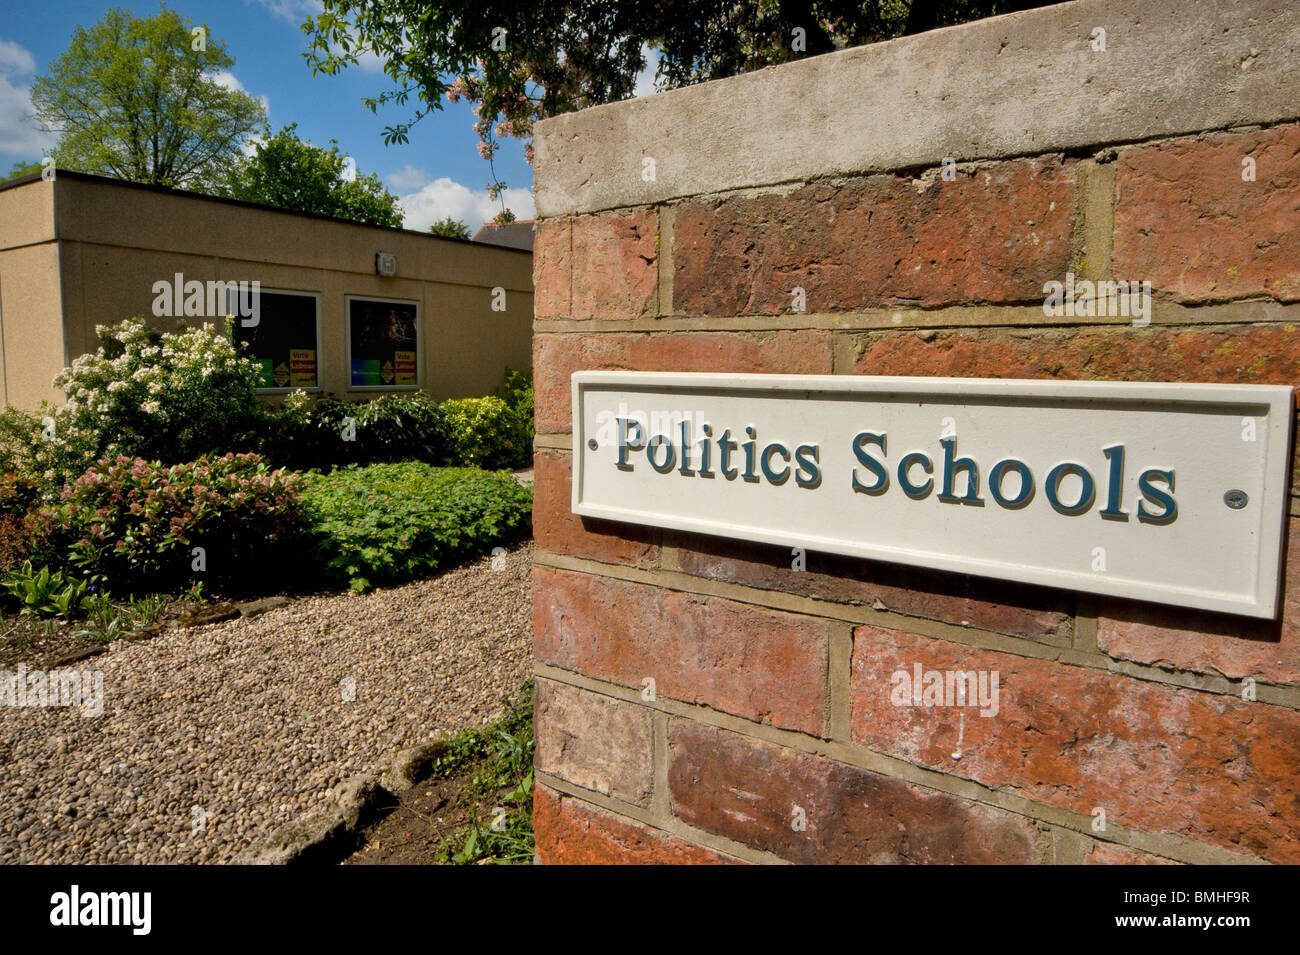 Rugby School, Politics School building with posters in window ‘Vote Labour’, Rugby Warwickshire, UK Stock Photo